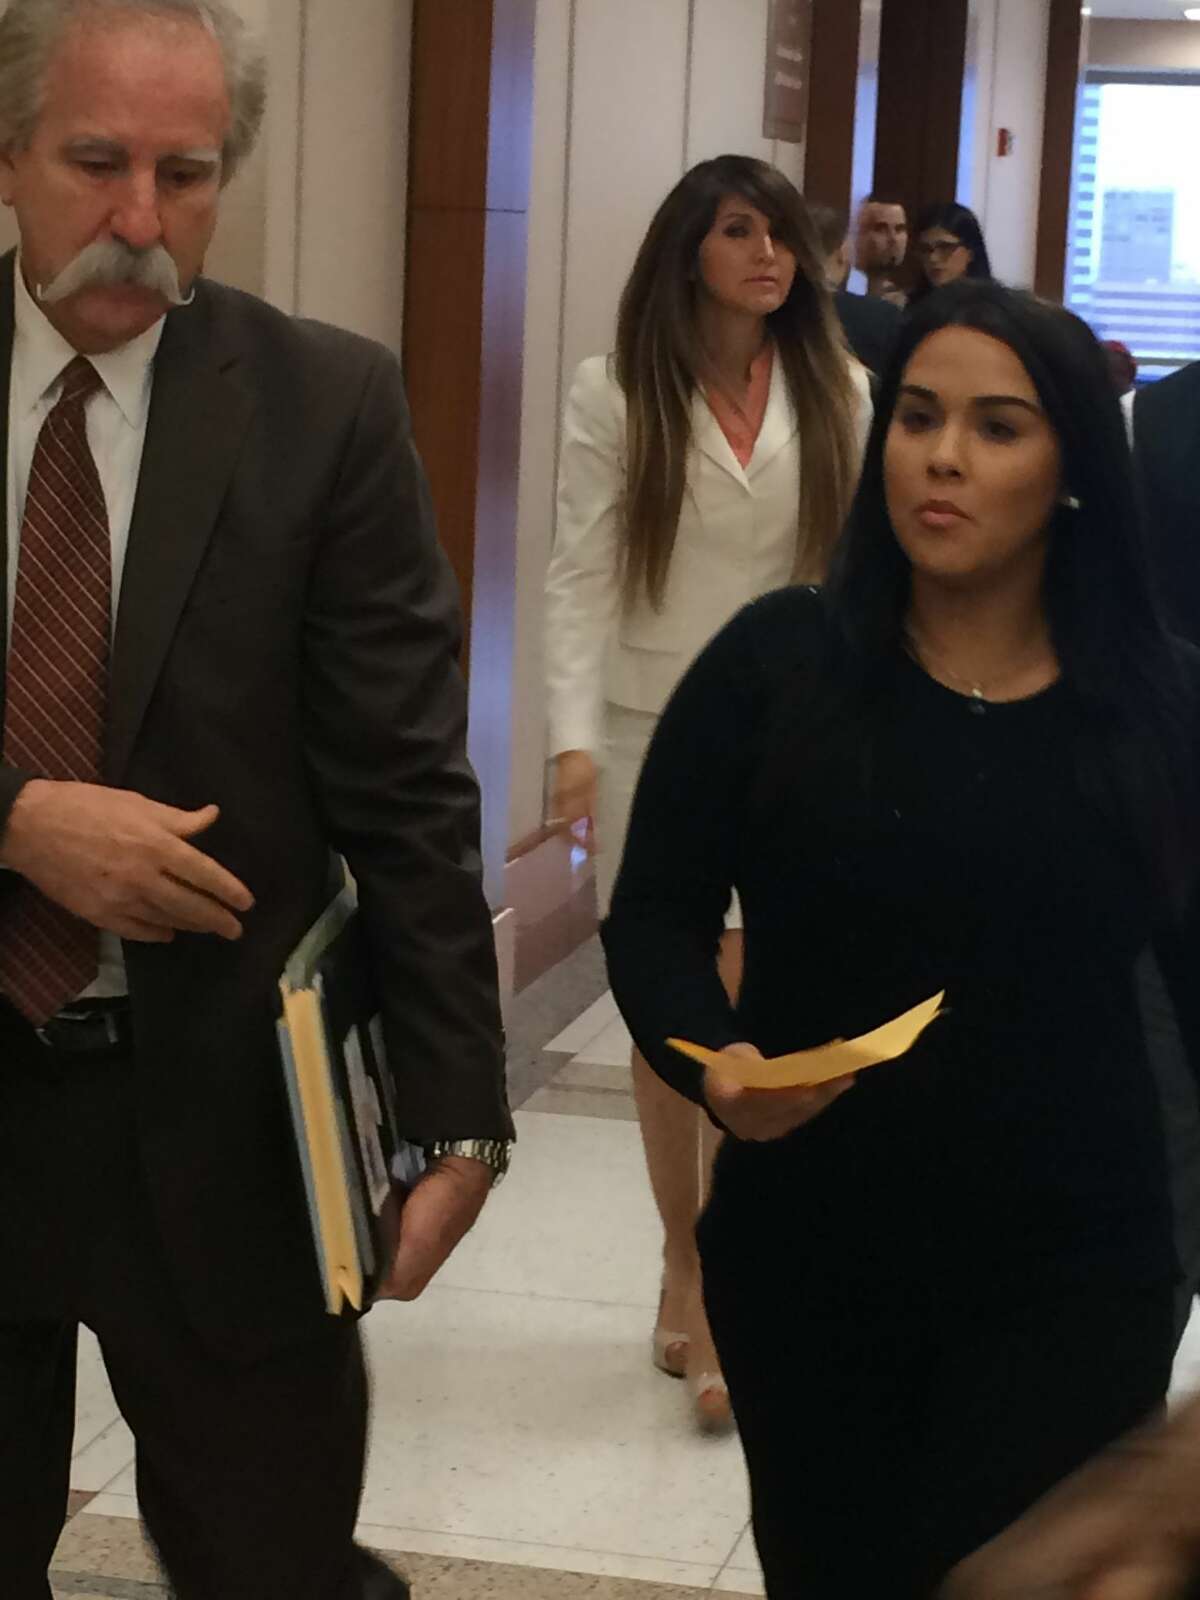 Alexandria Vera, the 24-year-old Aldine middle school teacher accused of having a long-term sexual relationship with a 13-year-old boy, is in court for a hearing, Tuesday, July 12, 2016.